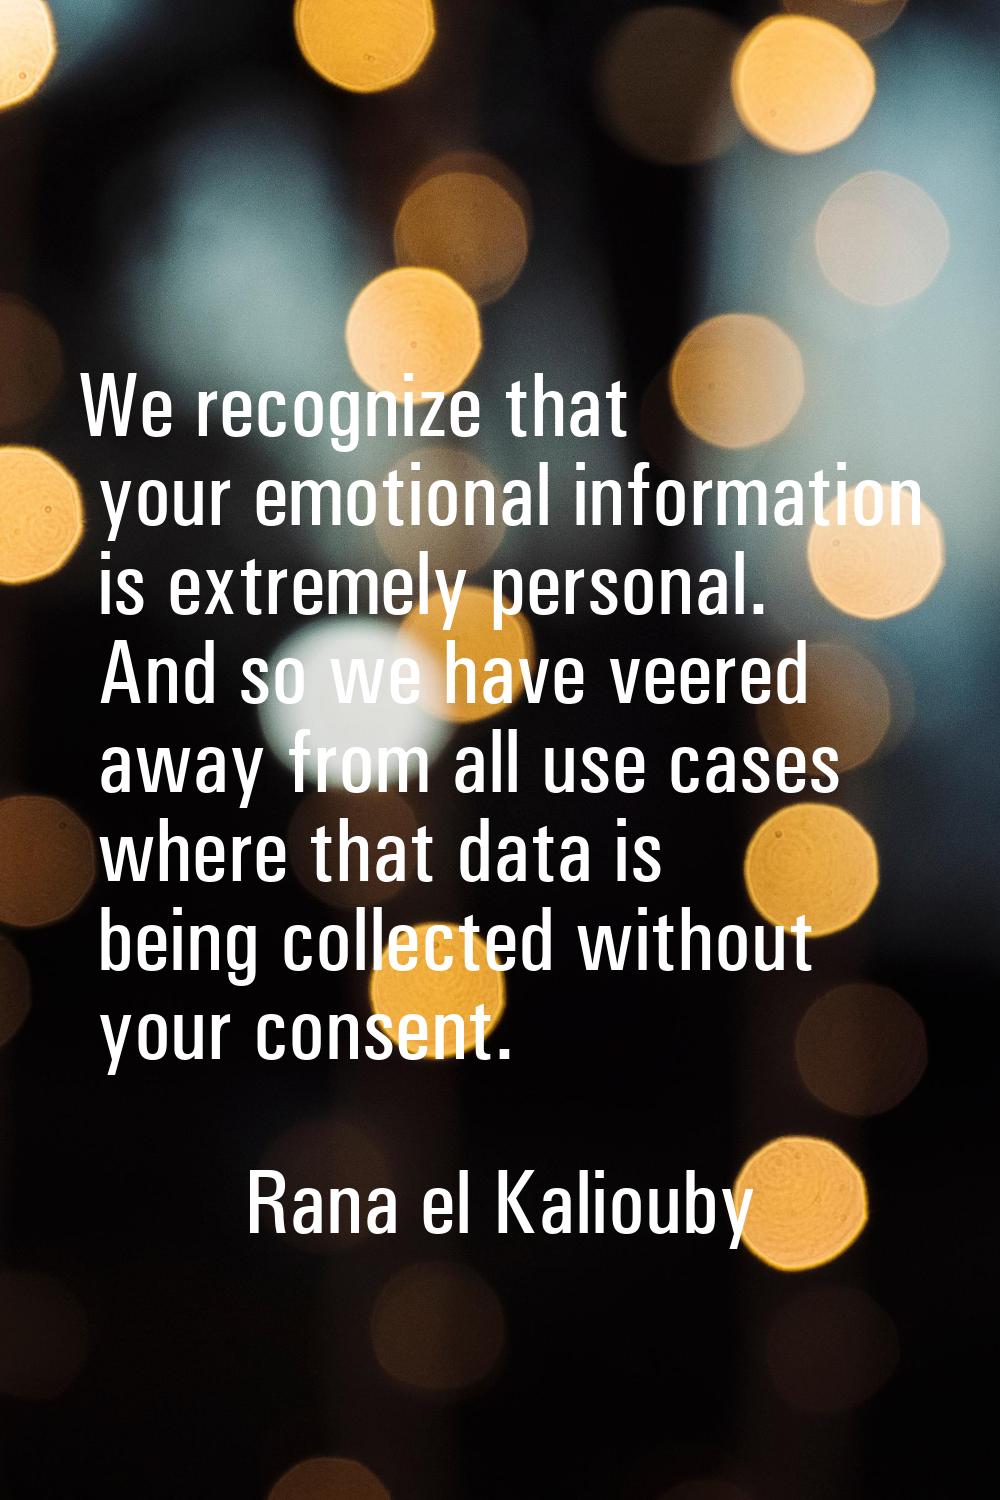 We recognize that your emotional information is extremely personal. And so we have veered away from